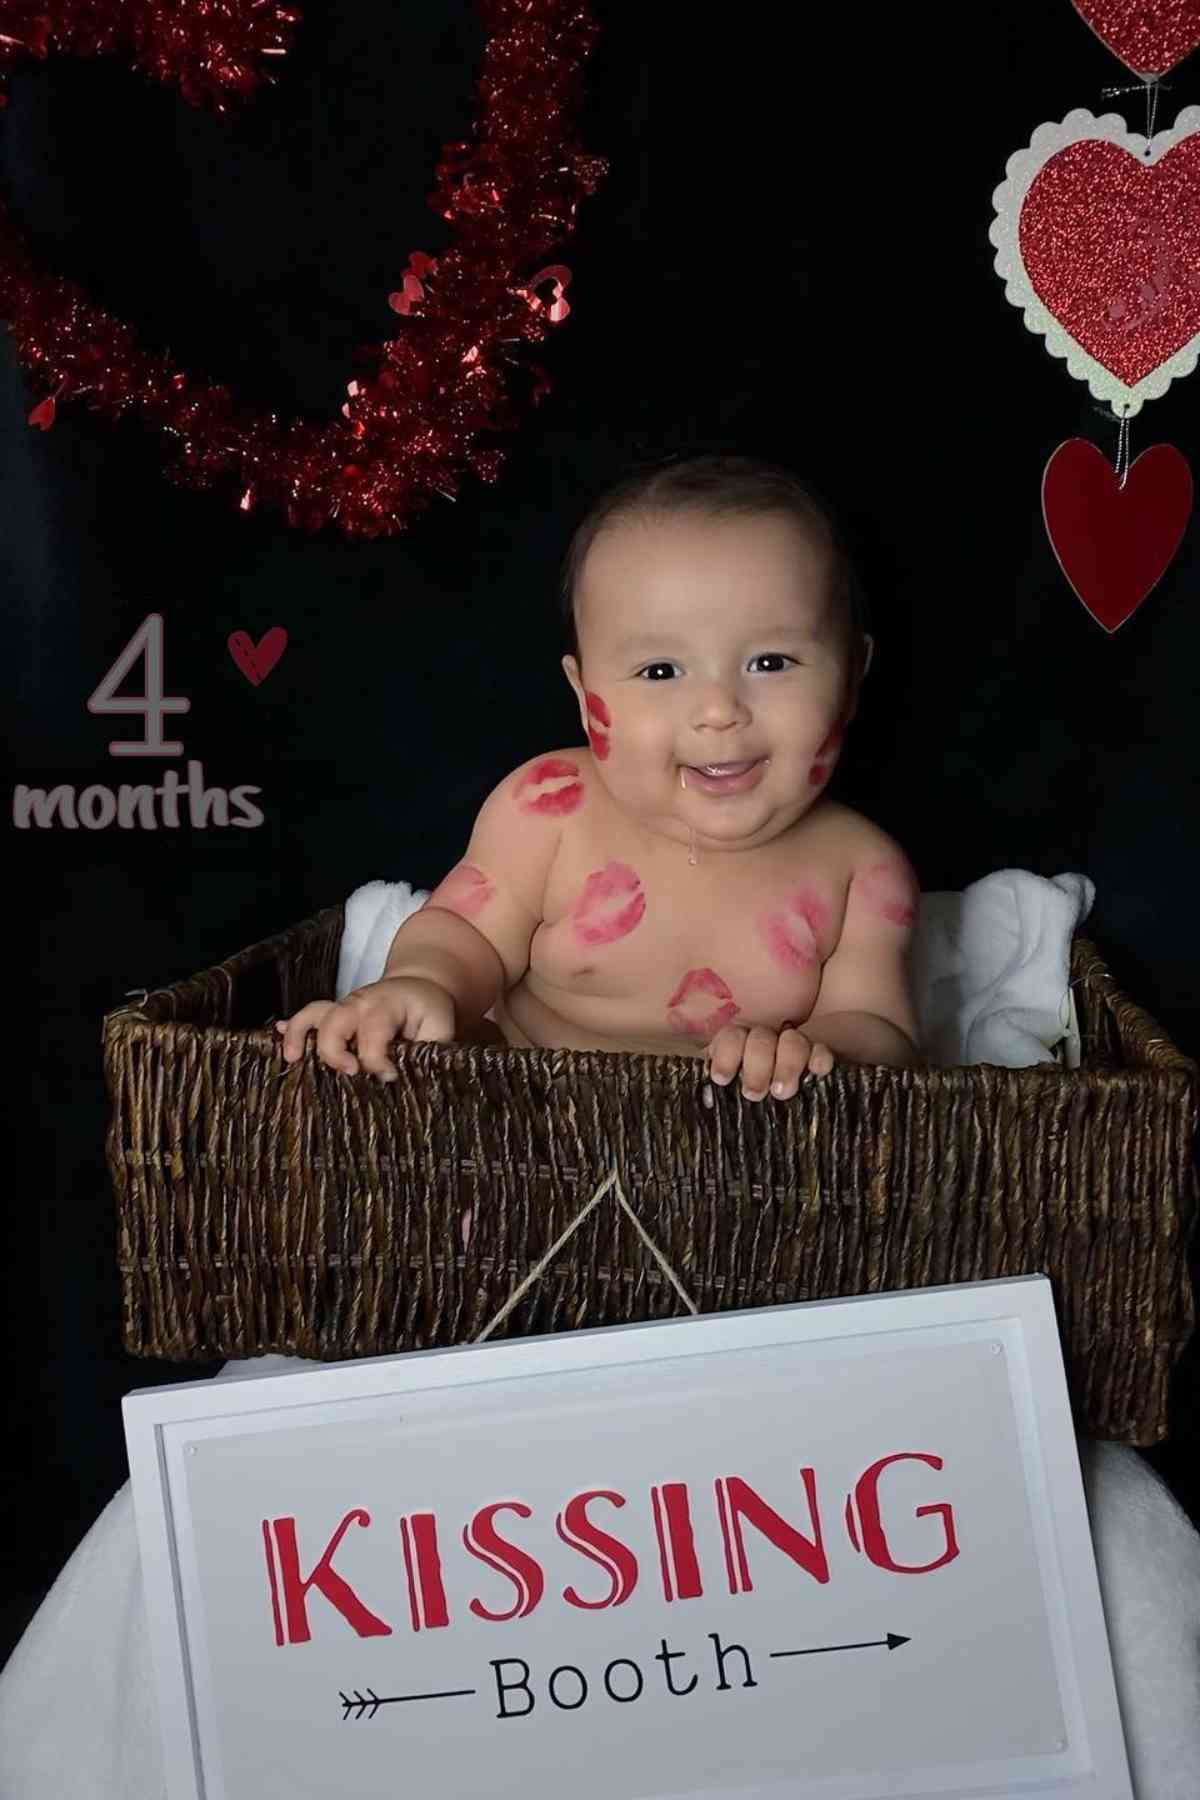 A baby sitting in a basket with a kissing booth sign.